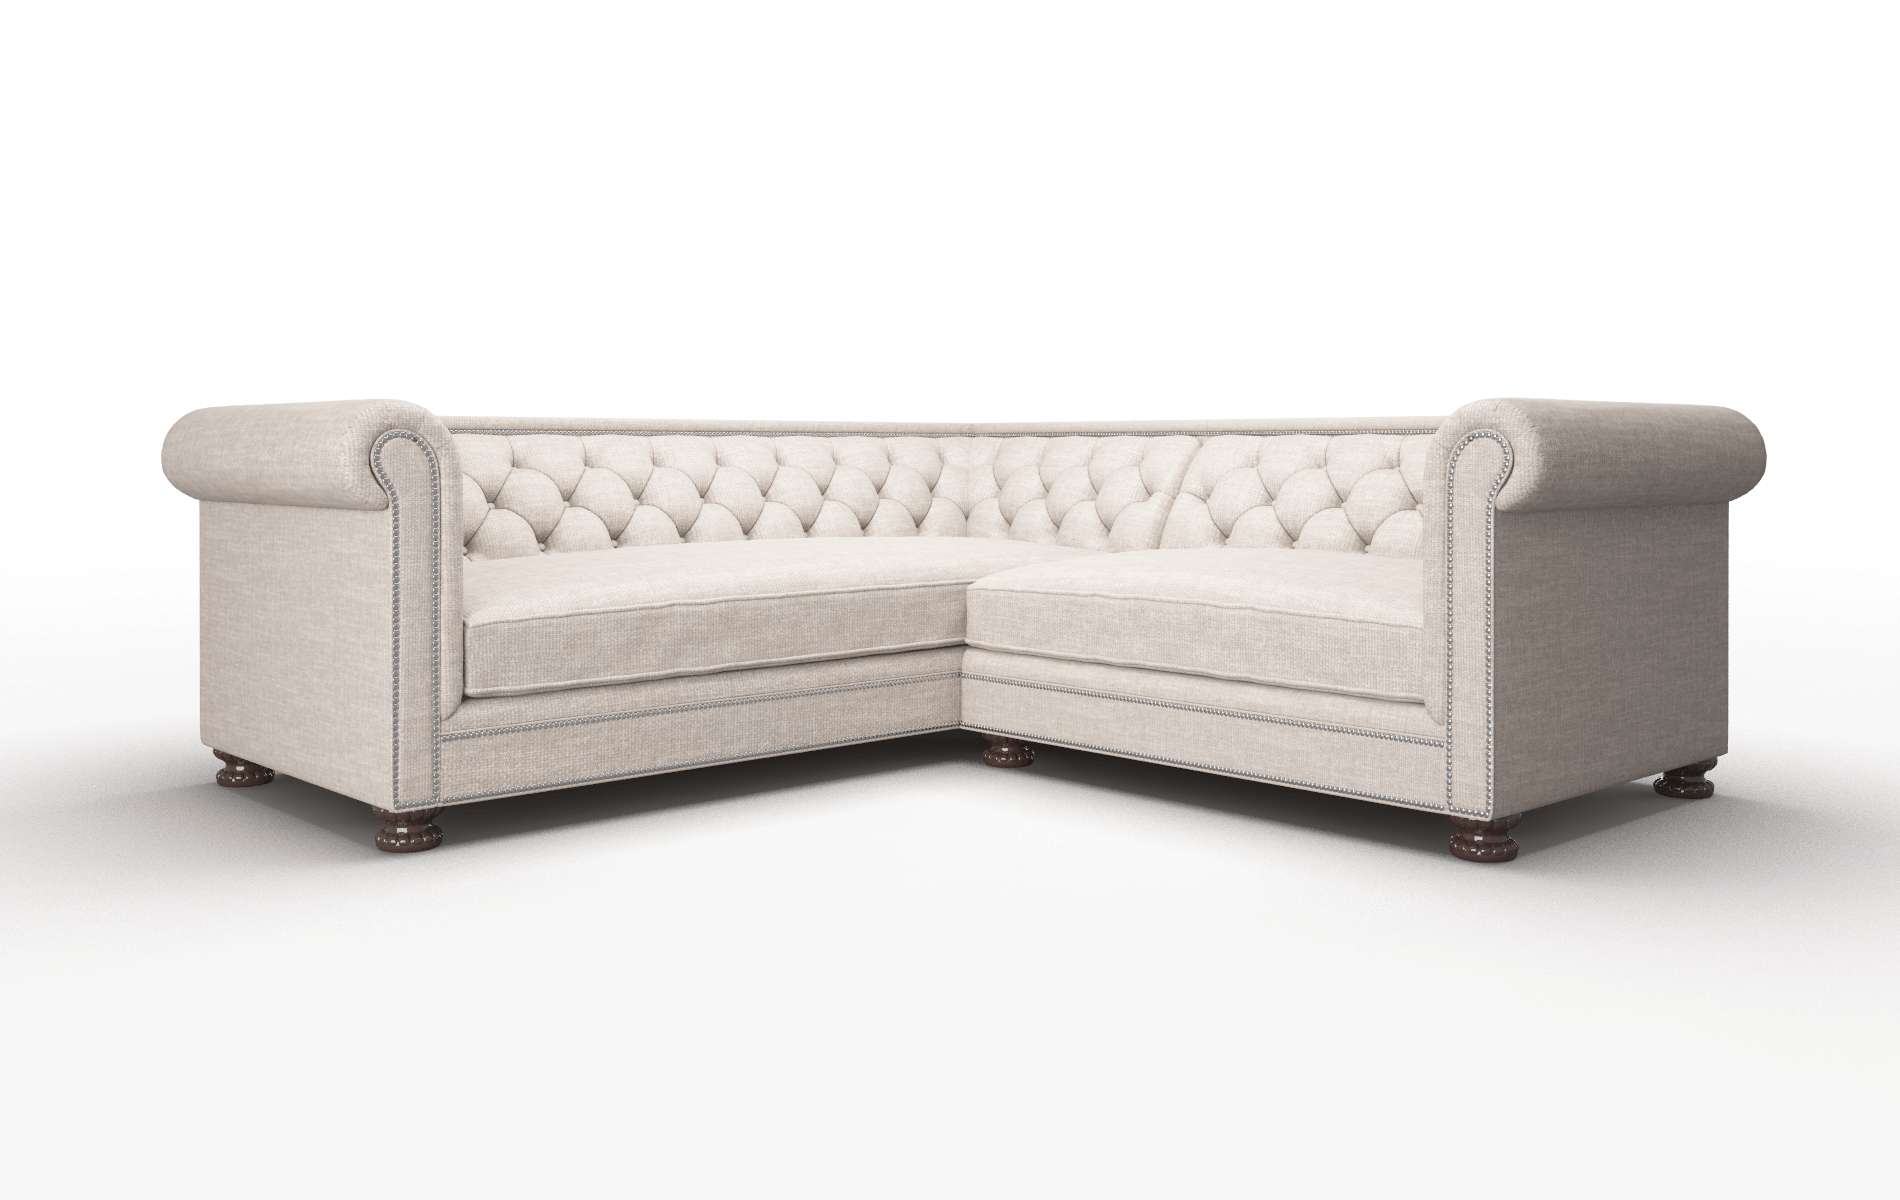 Athens Clyde Dolphin Sectional espresso legs